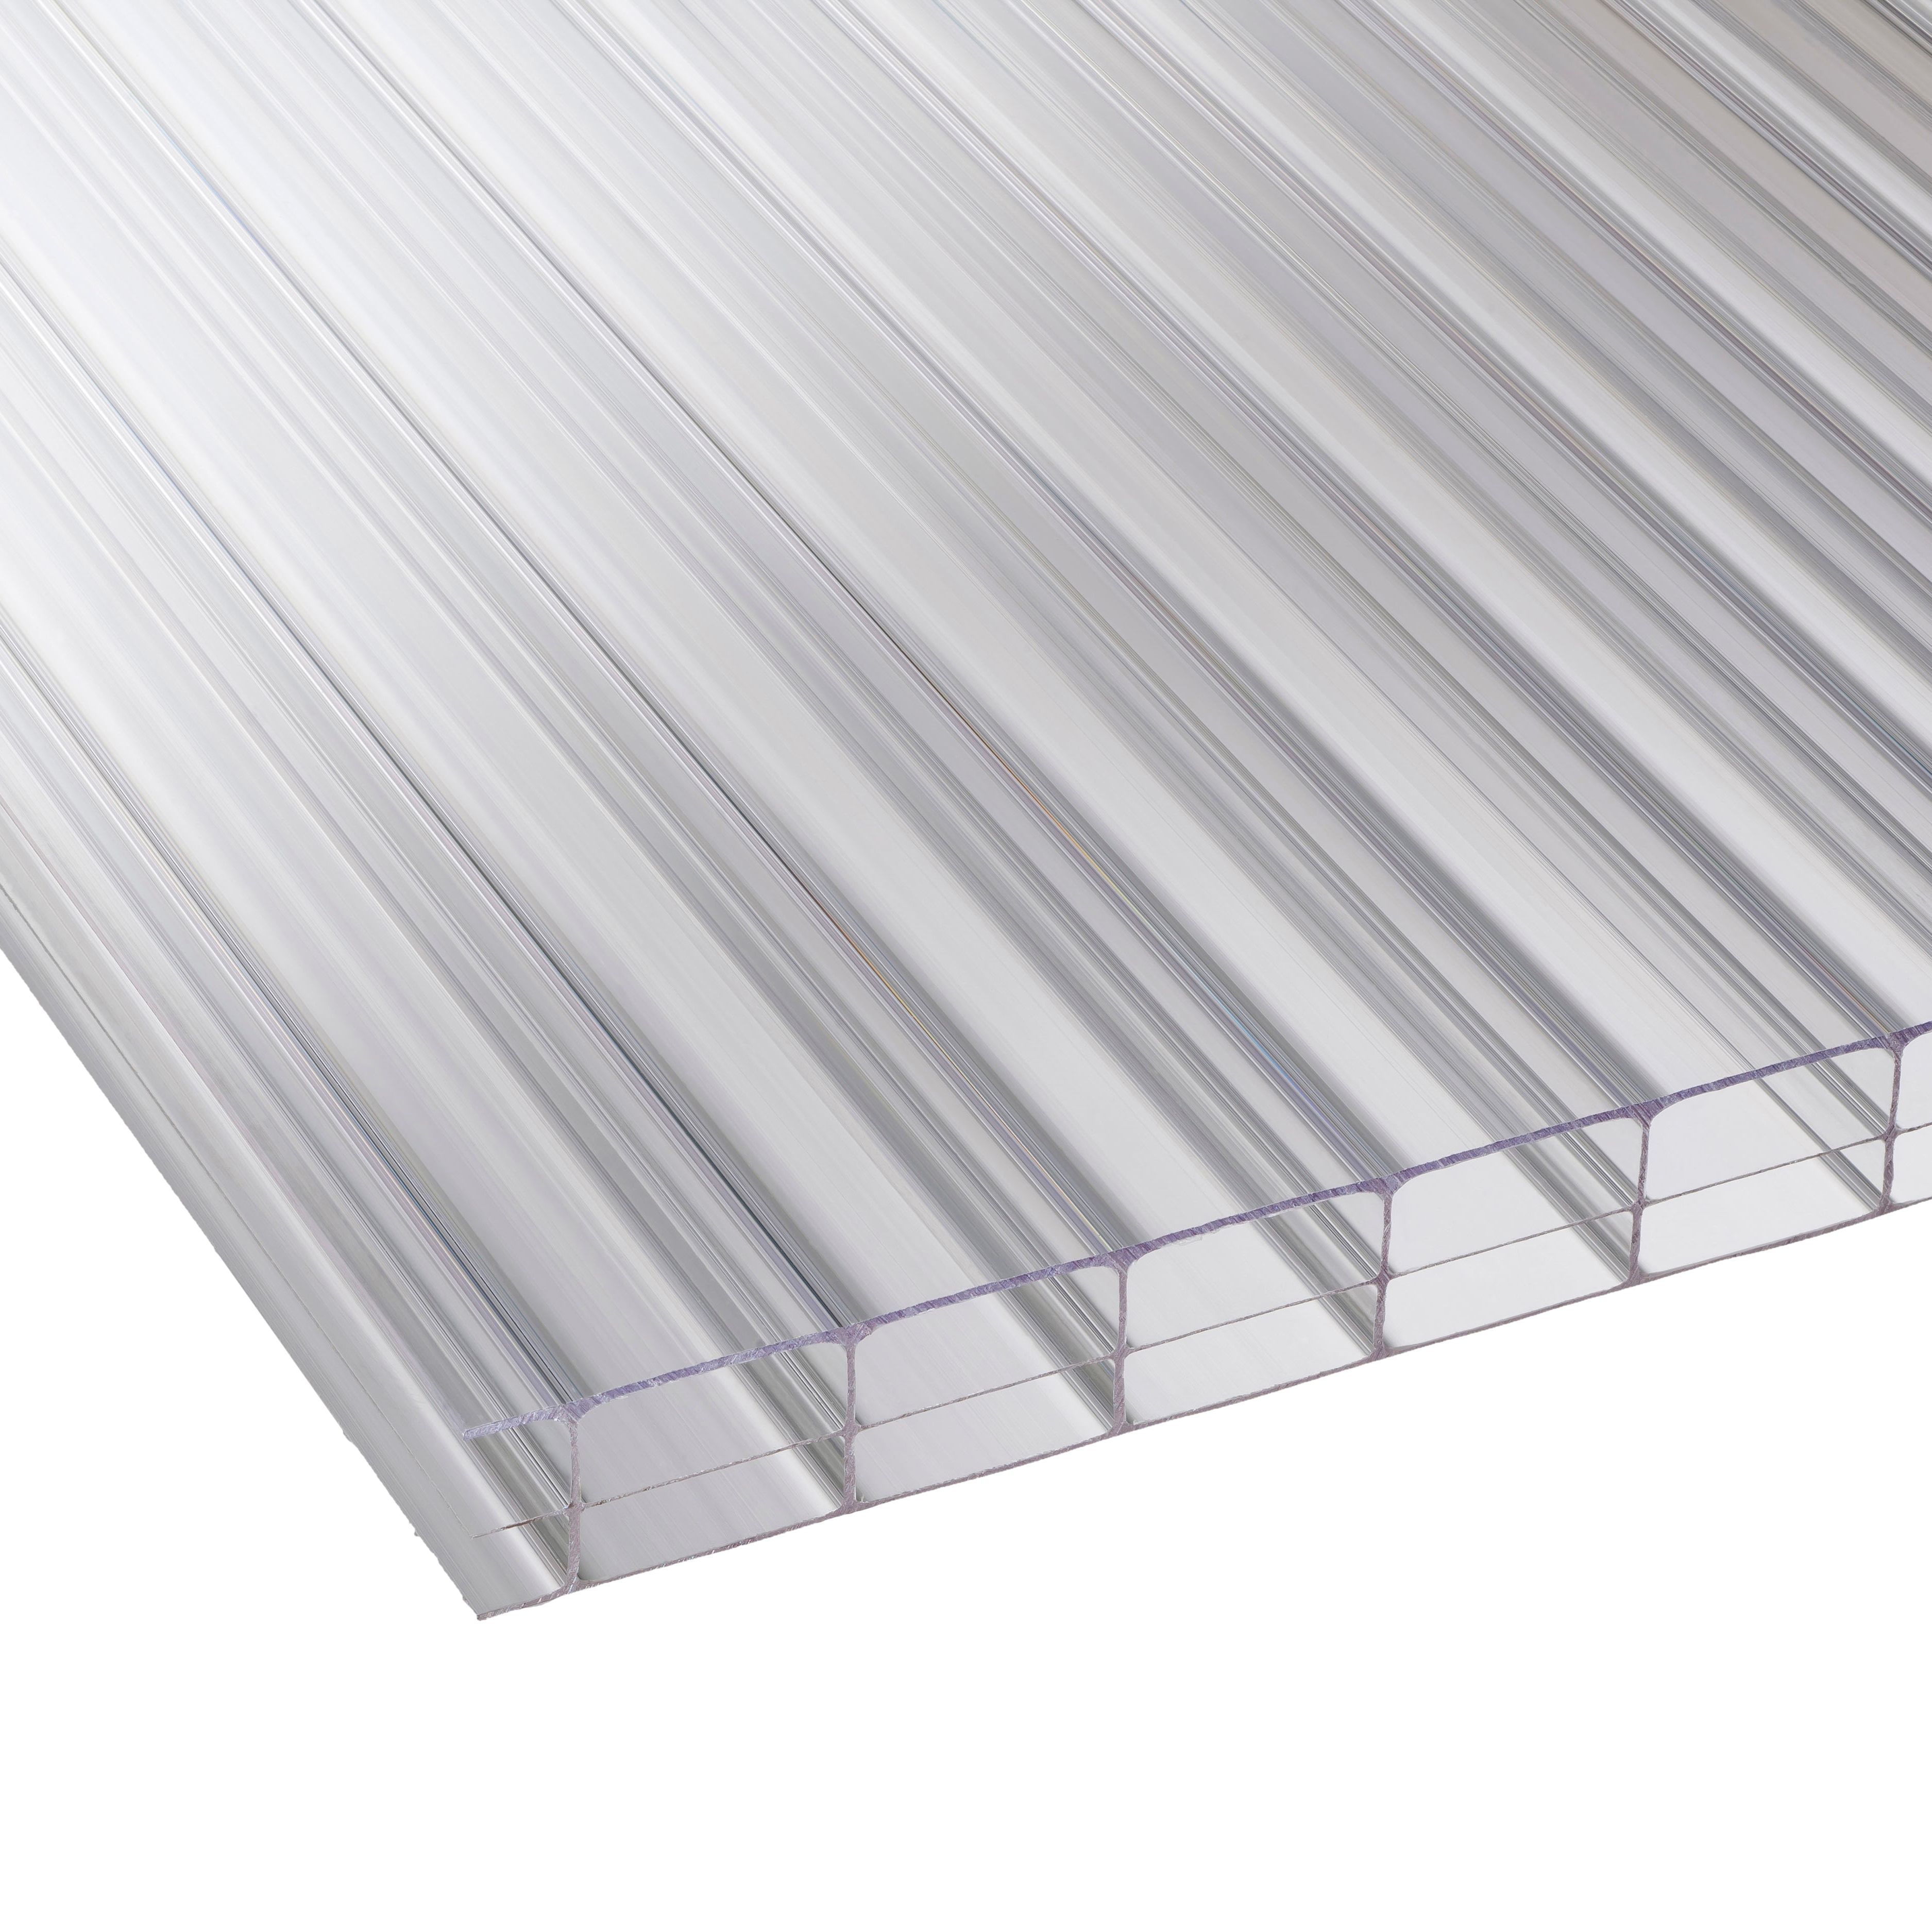 Clear Multiwall Polycarbonate Roofing Sheet 3M x 700mm, Pack of 5